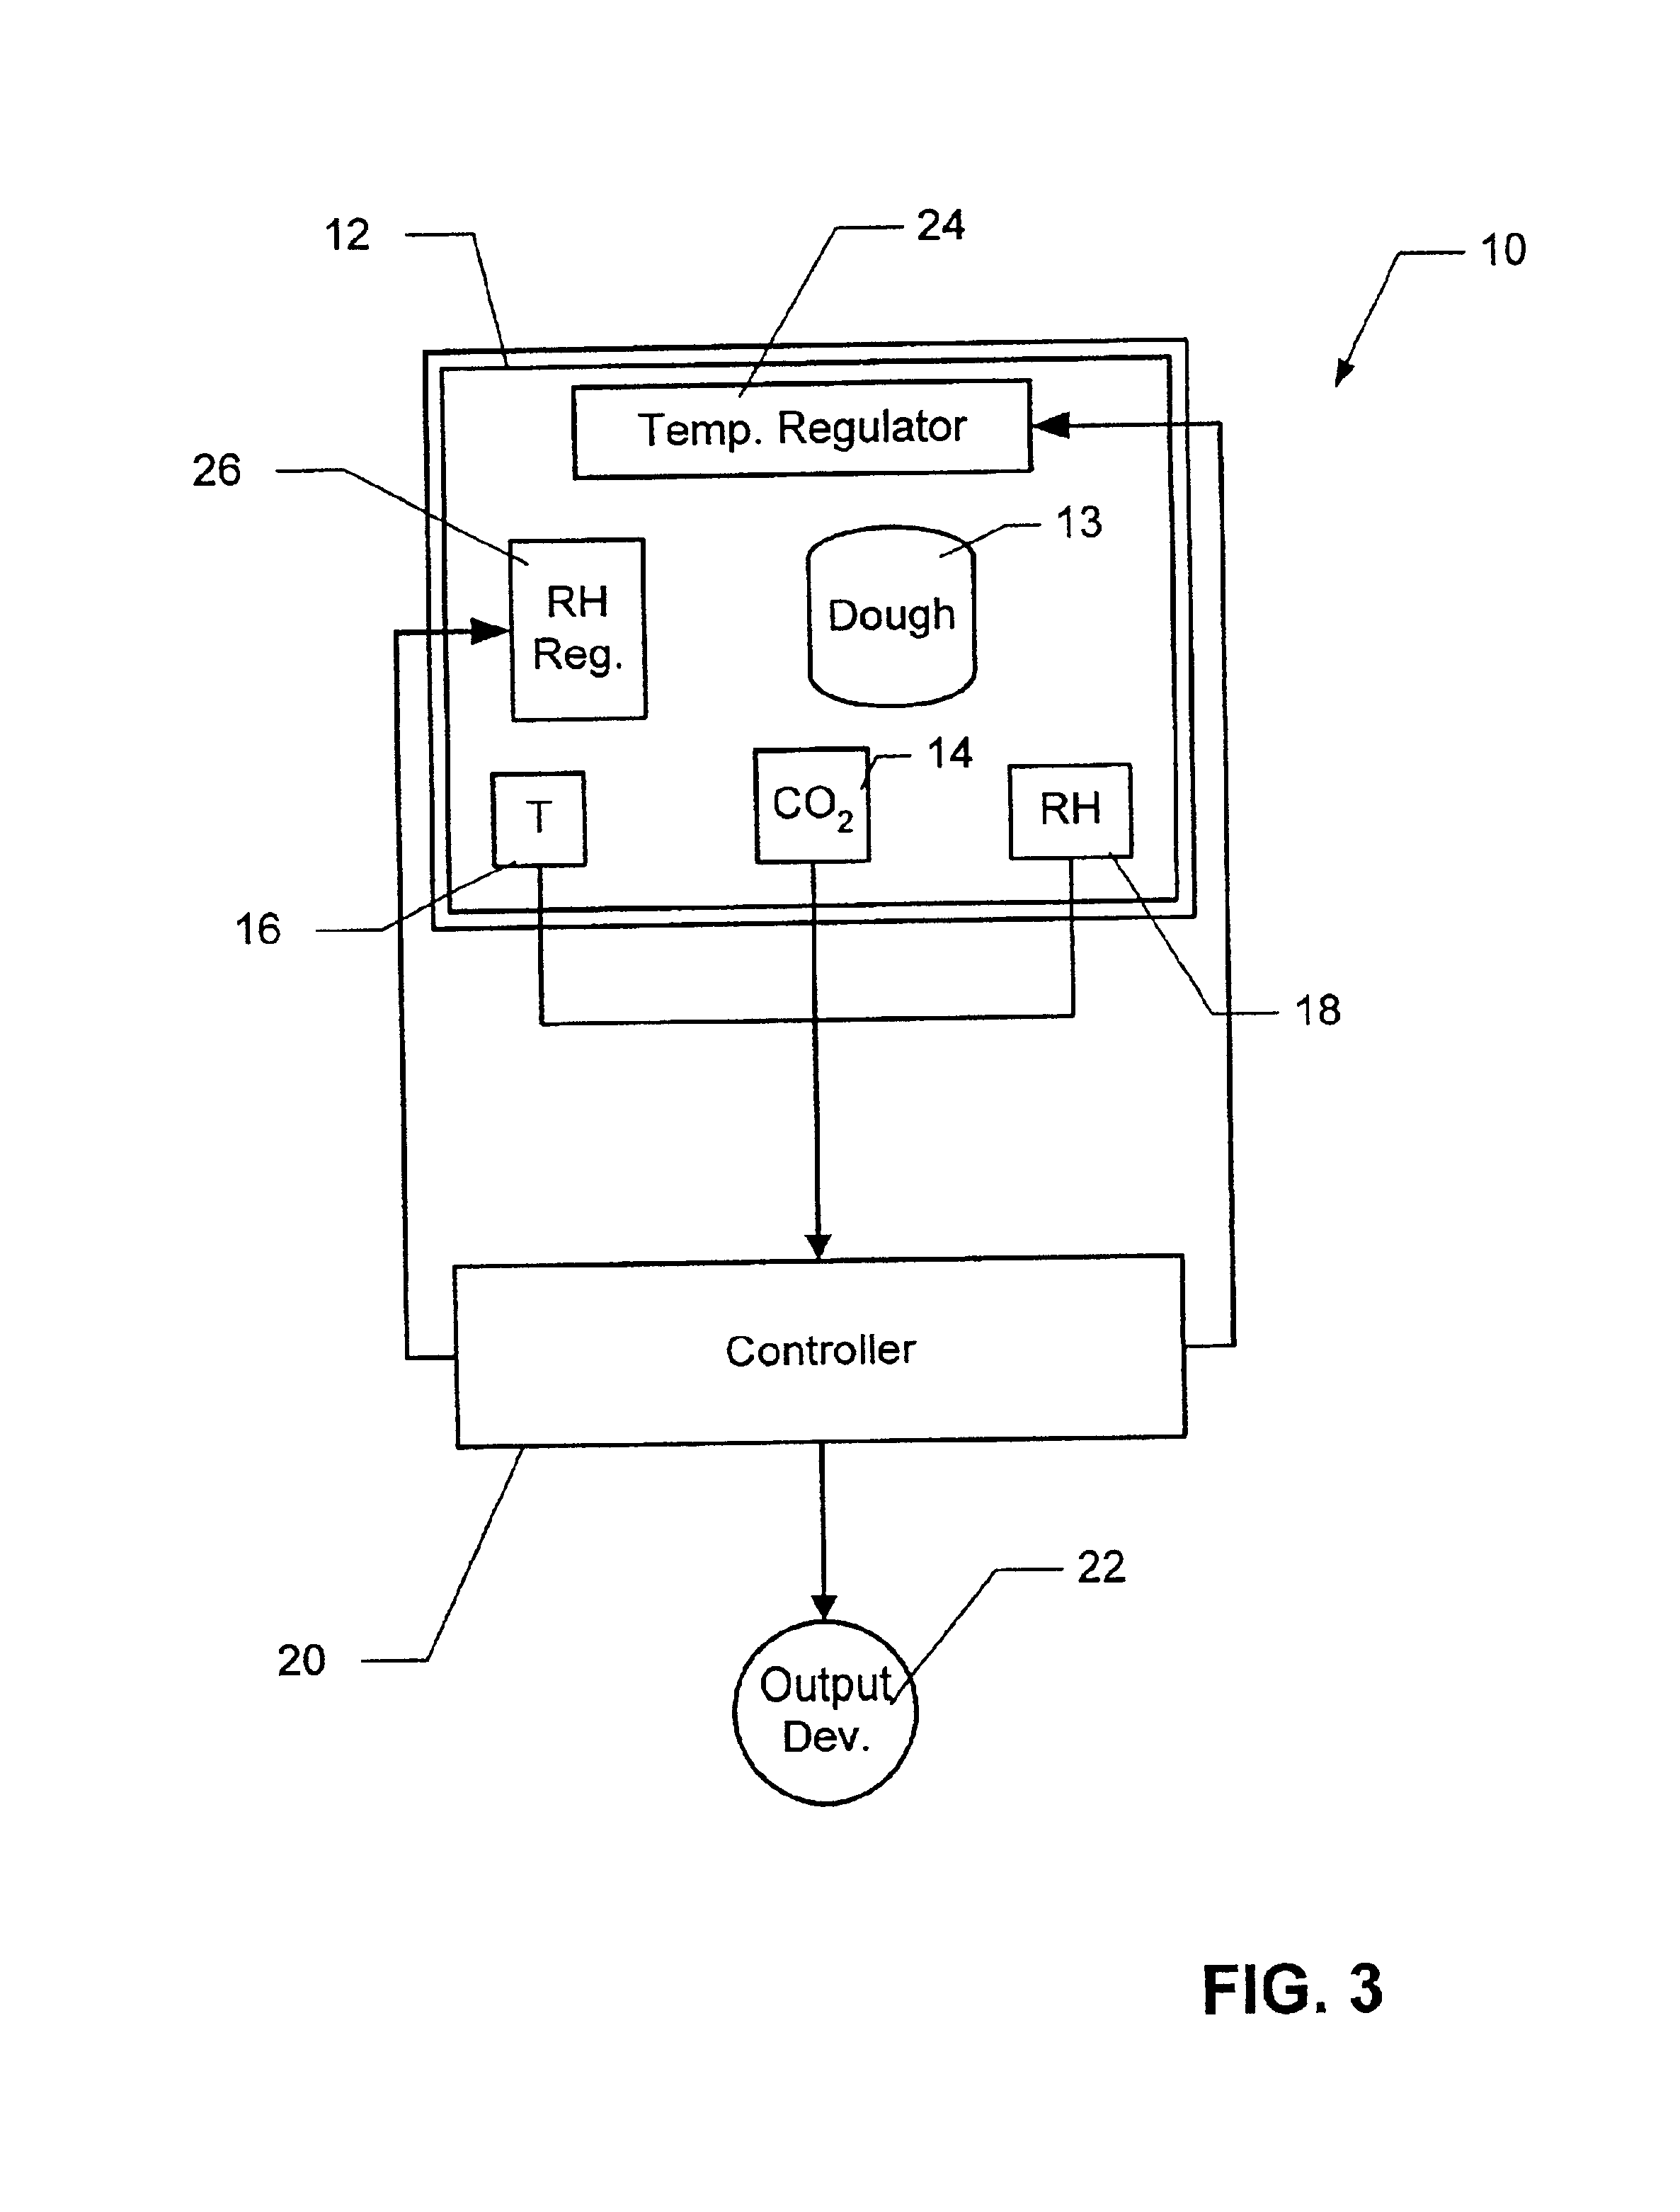 System and method of leavening with carbon dioxide monitoring